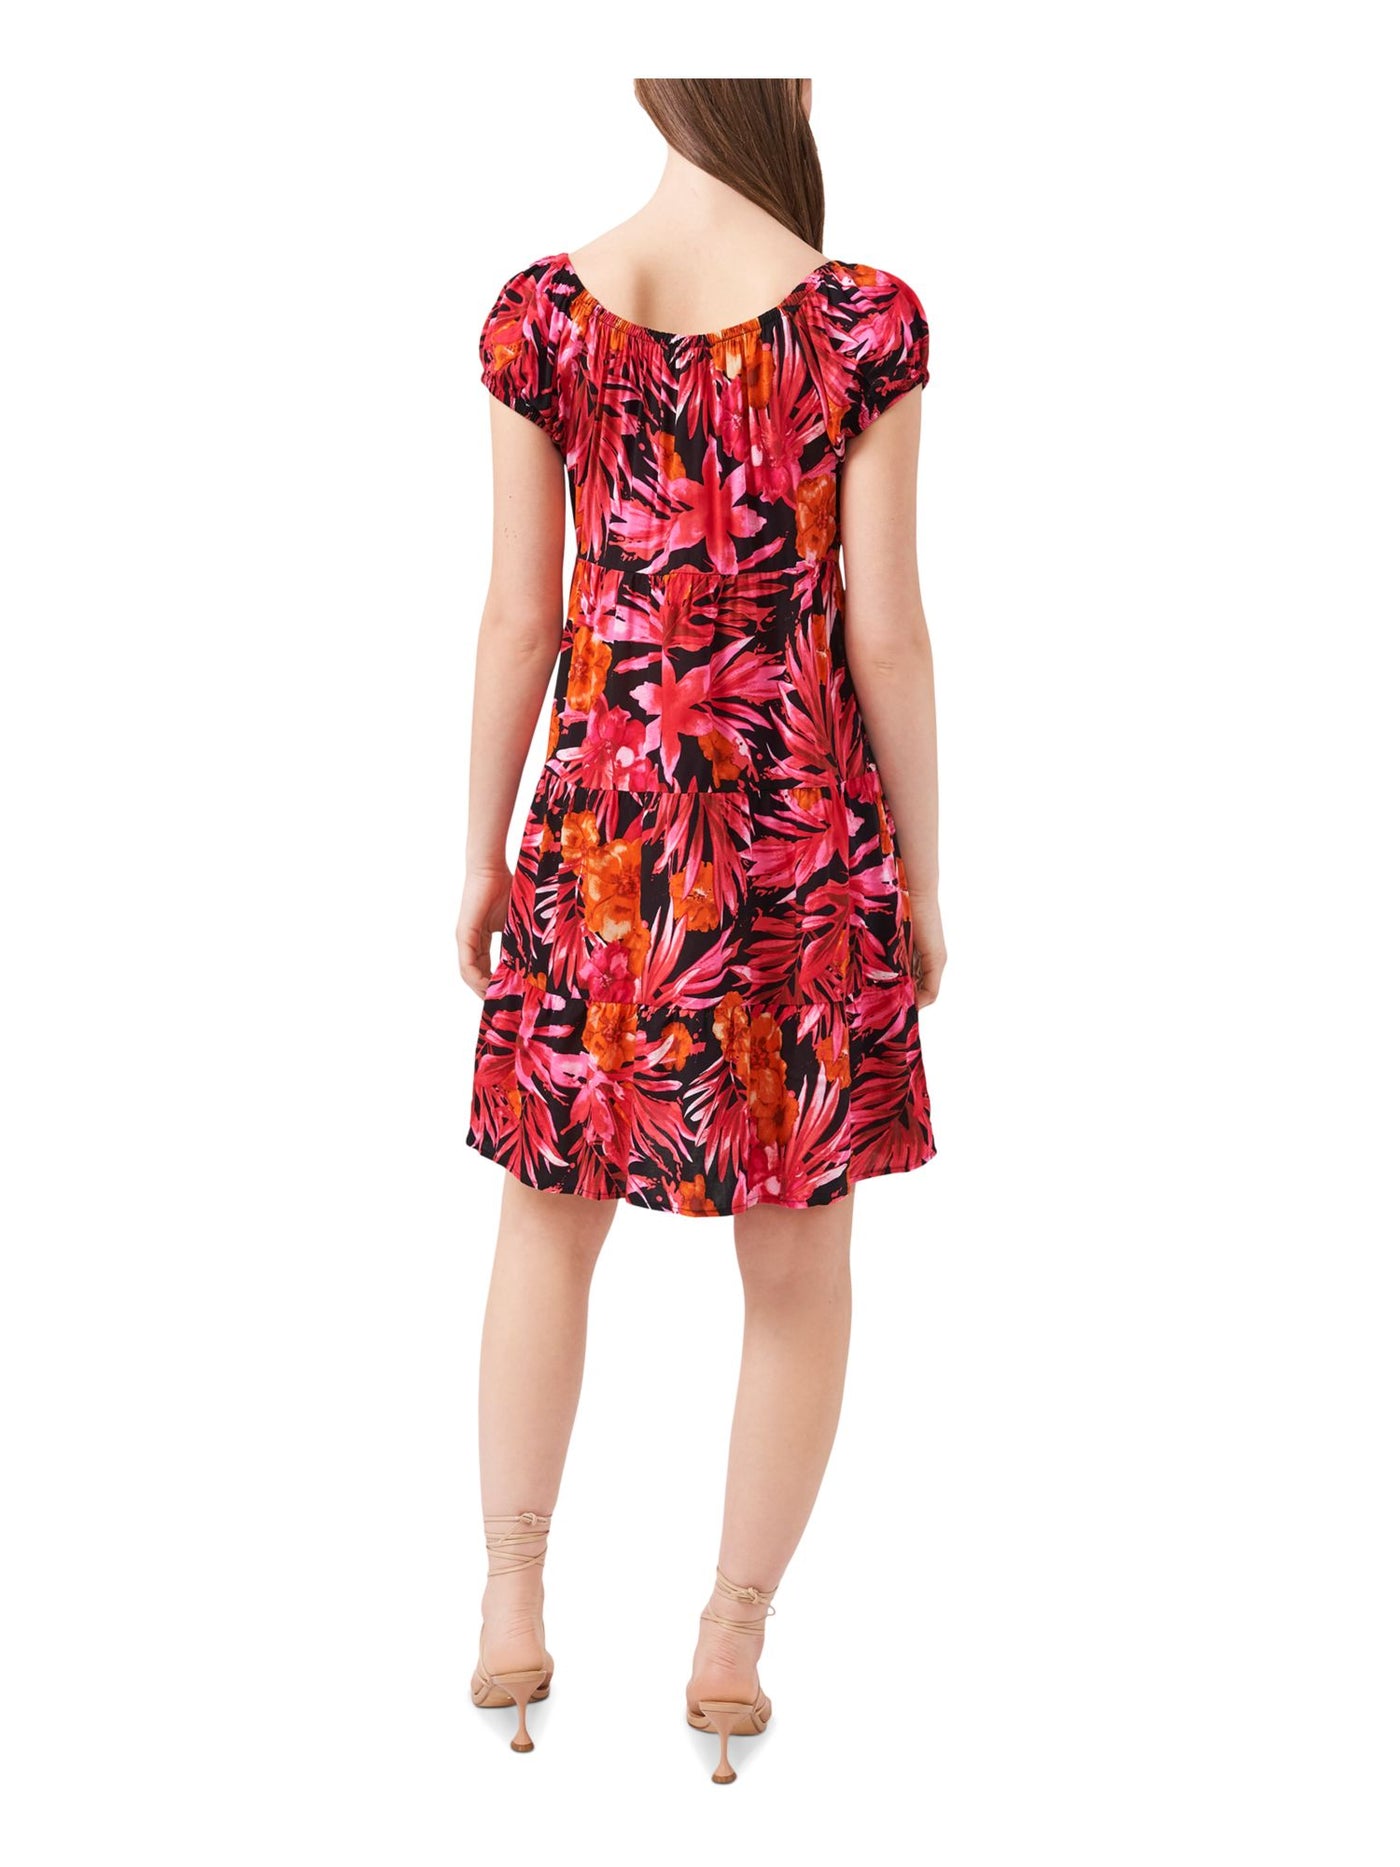 RILEY&RAE Womens Red Floral Short Sleeve Off Shoulder Short Party Fit + Flare Dress XL